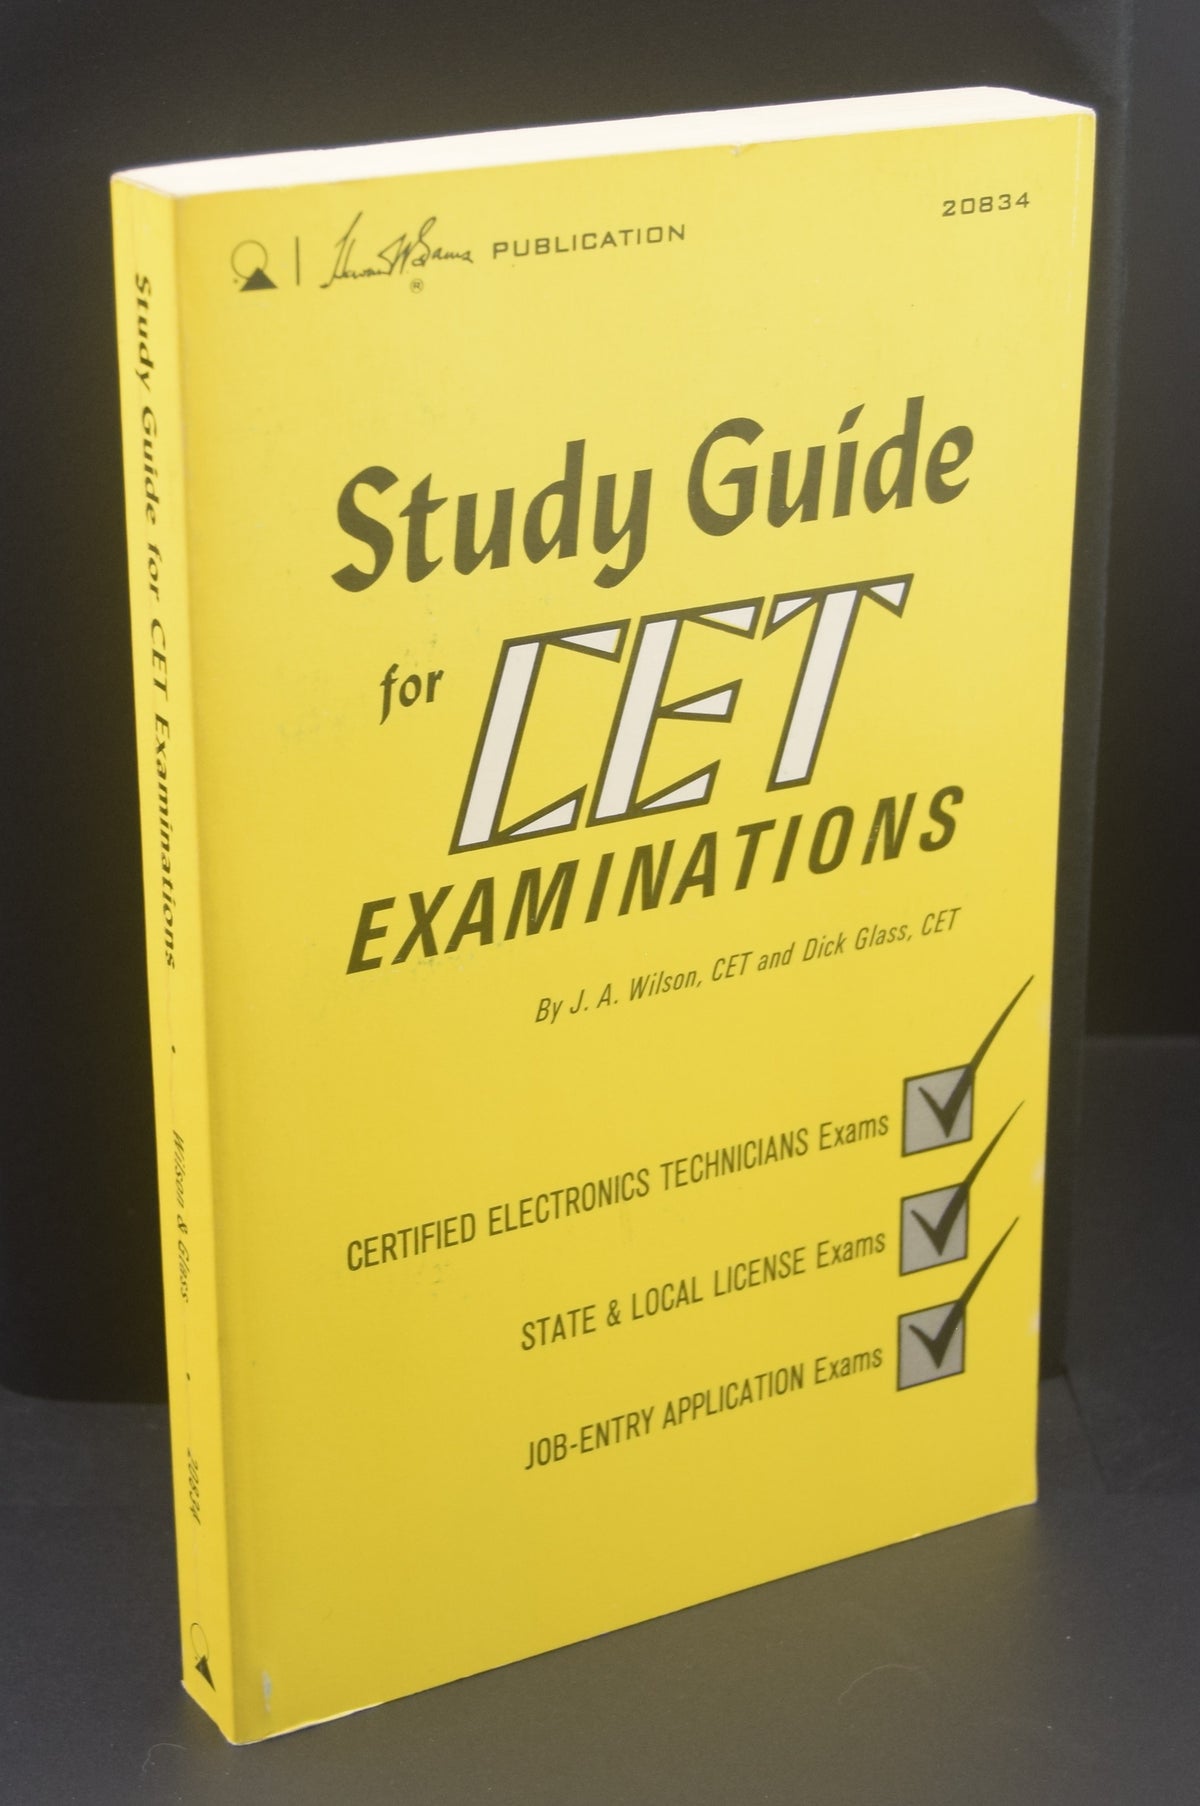 Study Guide for CET Examinations - Certified Electronics Technician - Dave's Hobby Shop by W5SWL